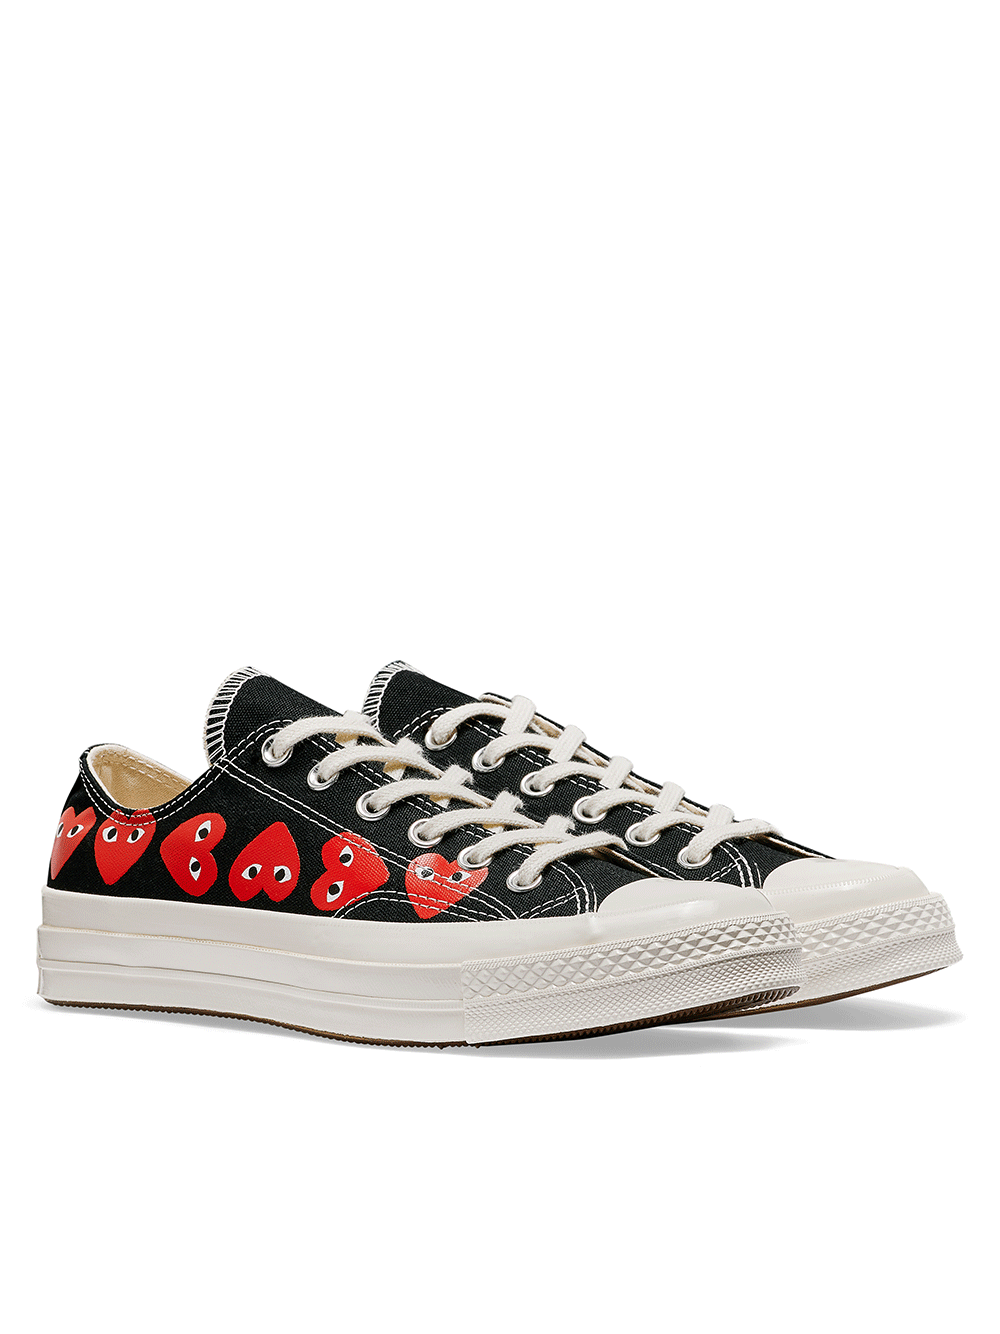 COMME-des-GARCONS-PLAY-CONVERSE-MULTI-HEART-Chuck-Taylor-All-Star-_70-Low-Sneakers-3